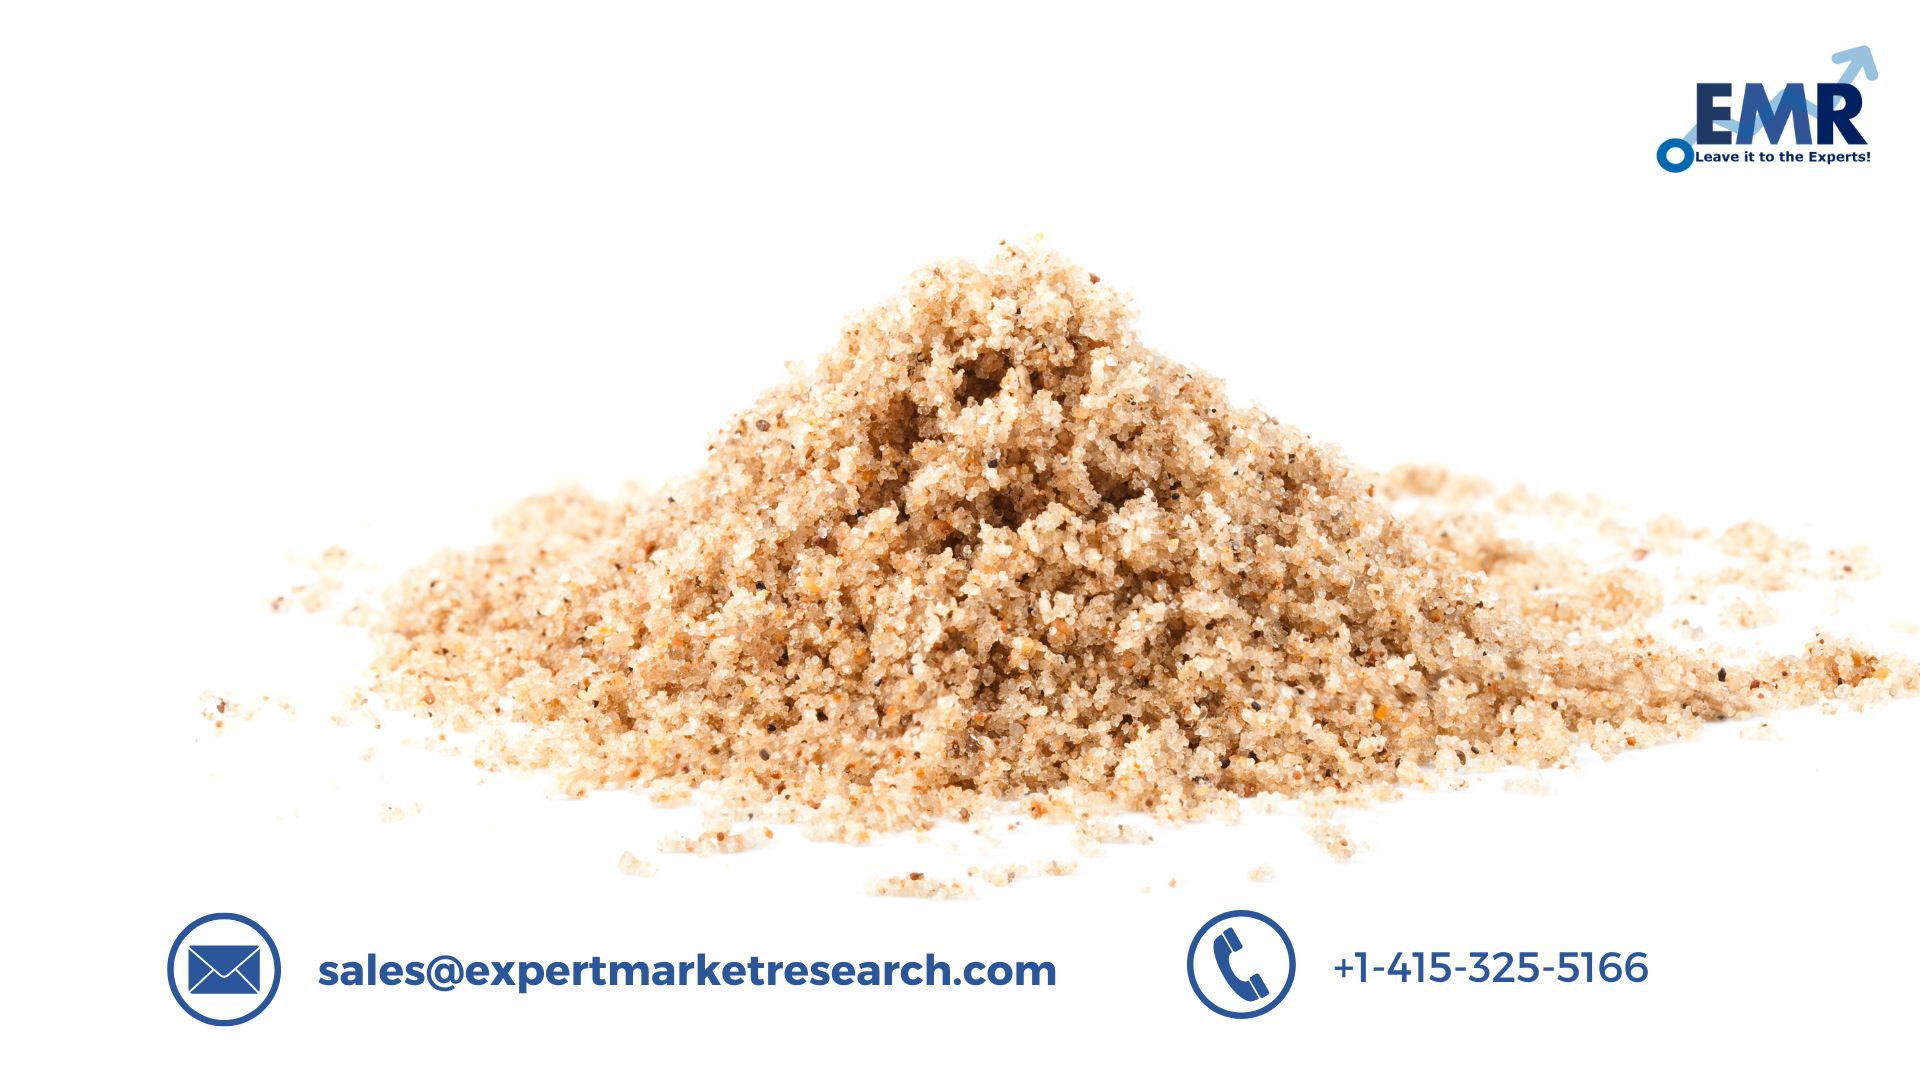 Silica Sand Market Size to Grow at a CAGR in the Forecast Period